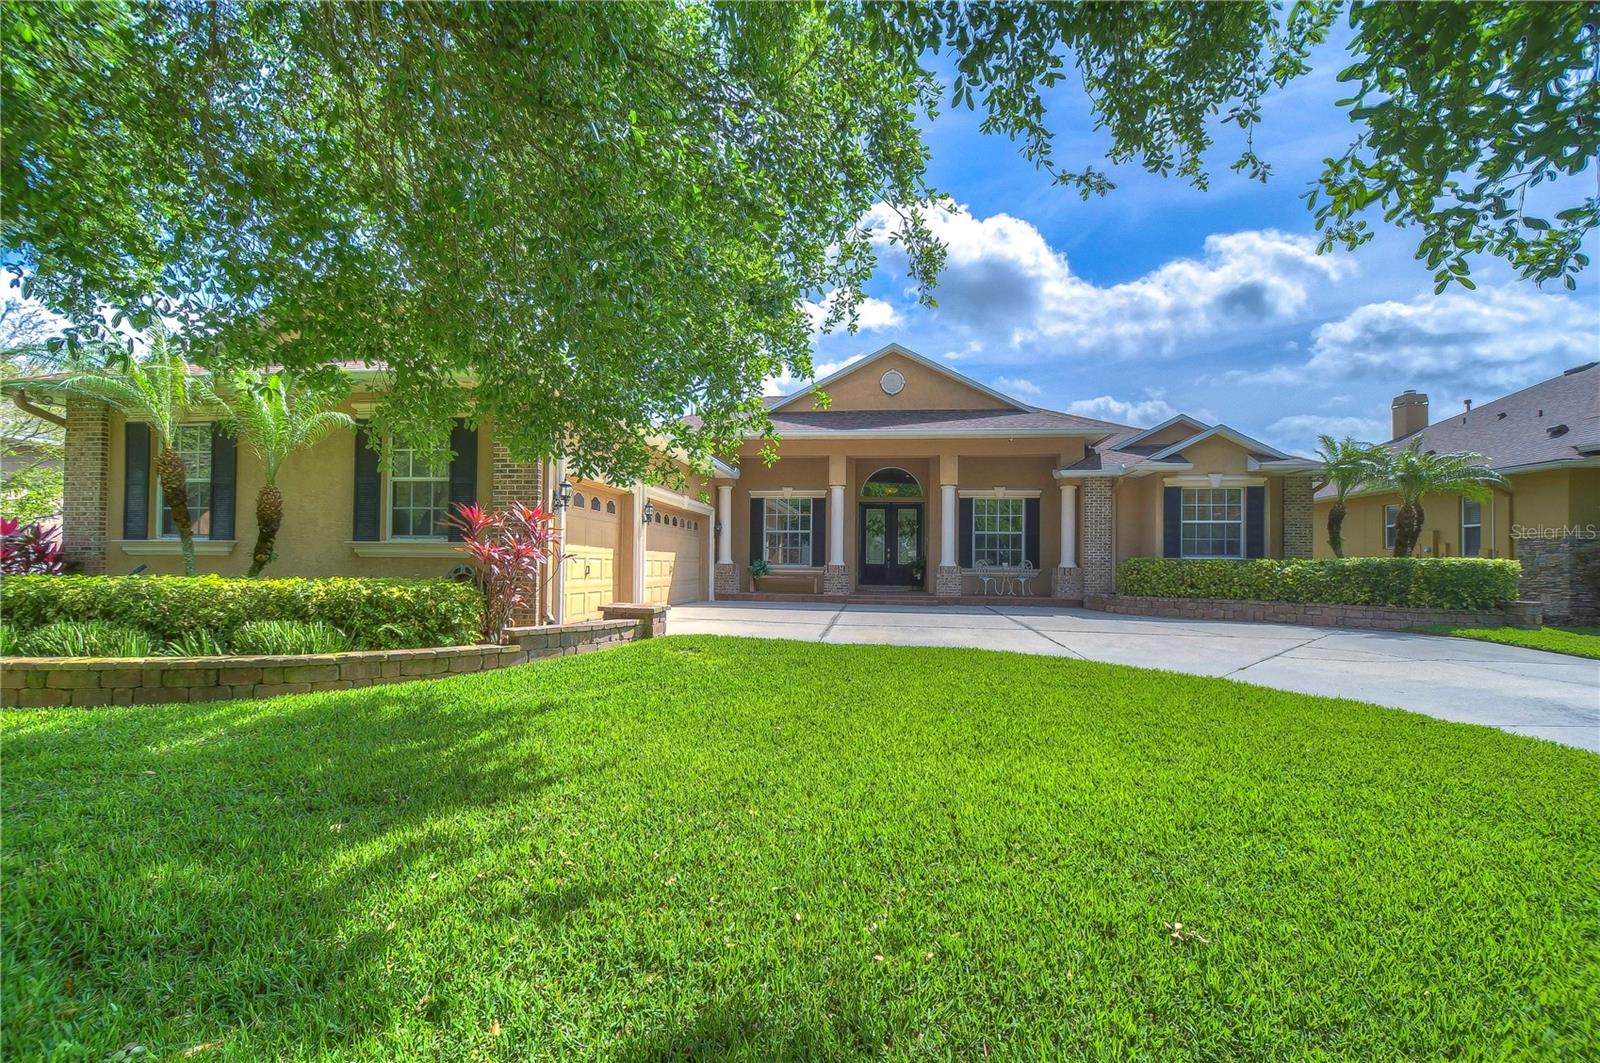 Details for 705 Charter Wood Place, VALRICO, FL 33594